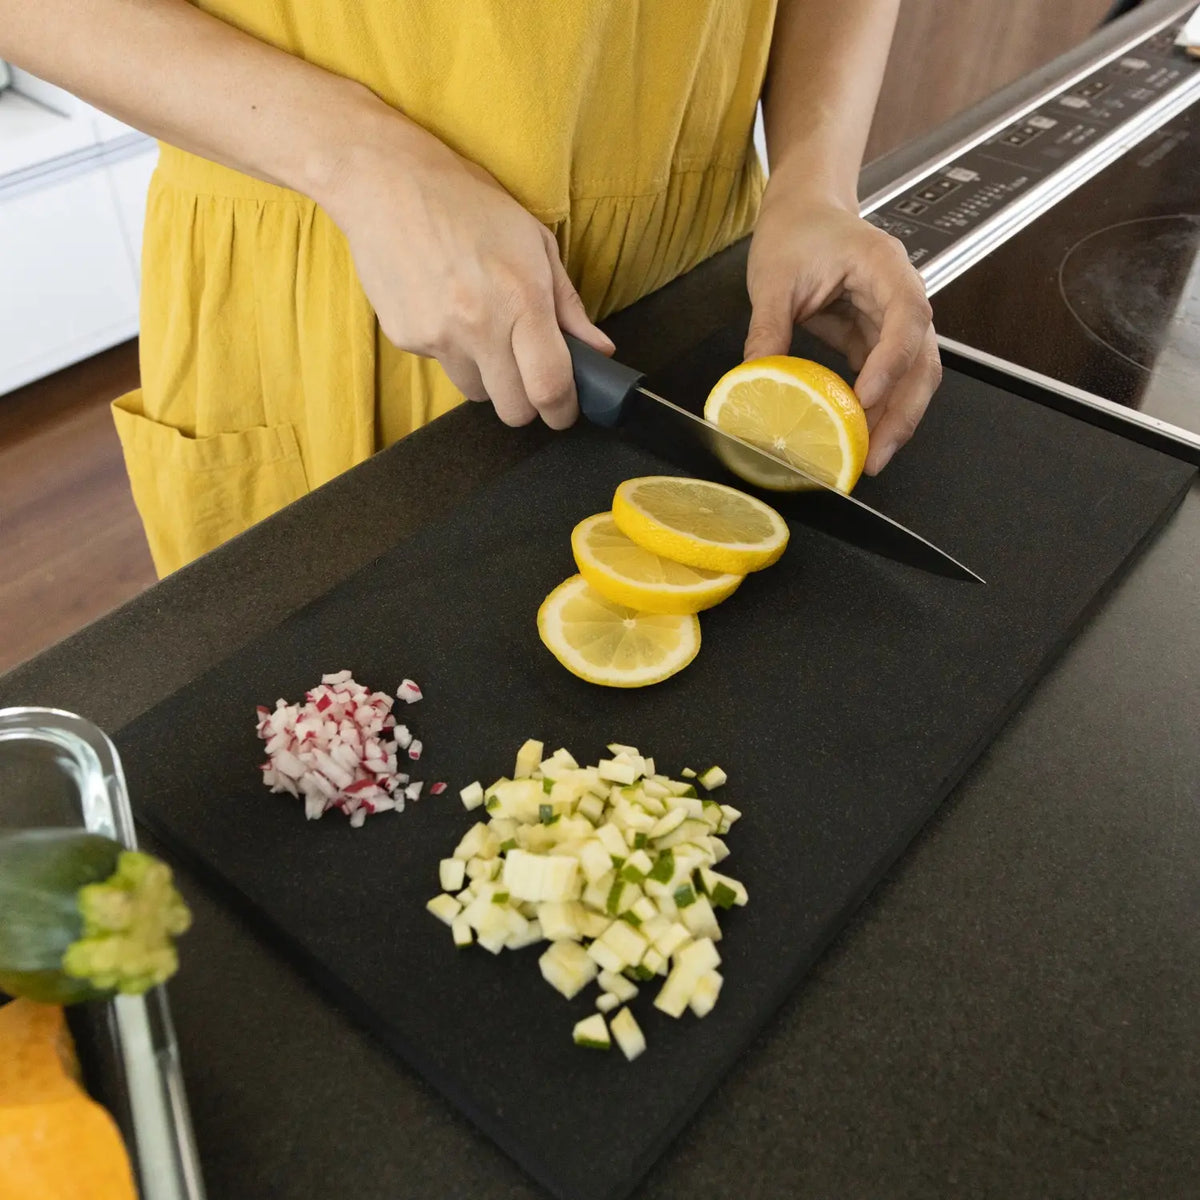 Synthetic Rubber Cutting board (M) : Home & Kitchen 